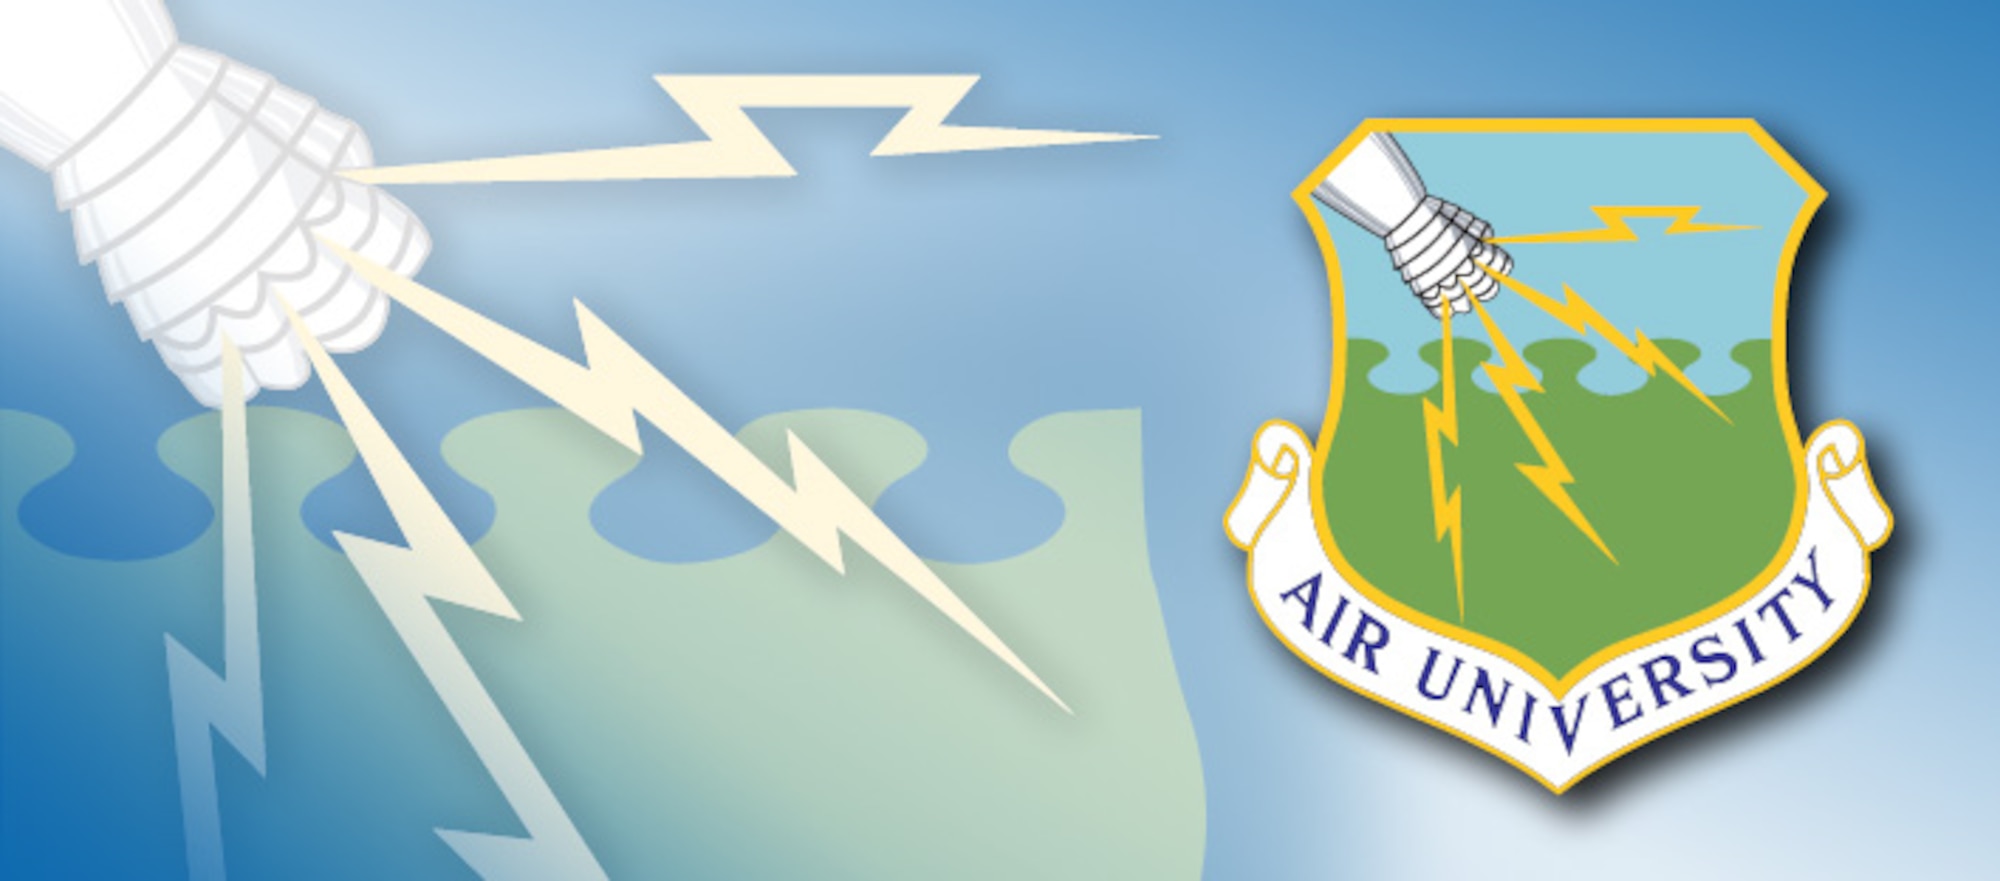 Air University offers new online master's program for Air Force civilians. (U.S. Air Force graphic)